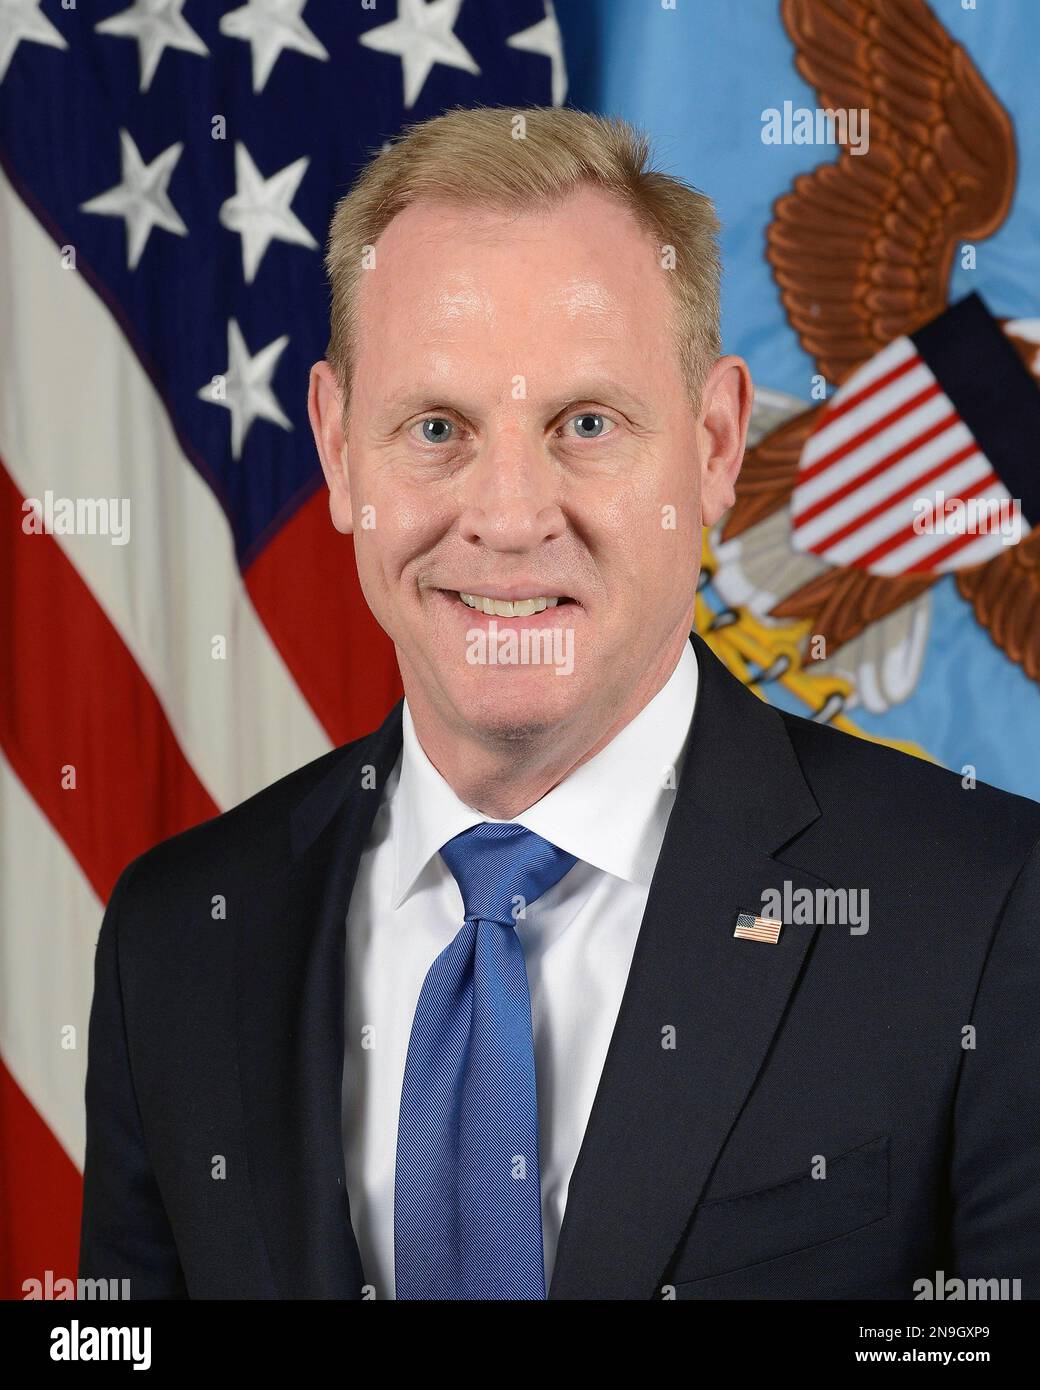 Patrick Michael Shanahan, former United States federal government official who served as acting U.S. Secretary of Defense in 2019. Stock Photo